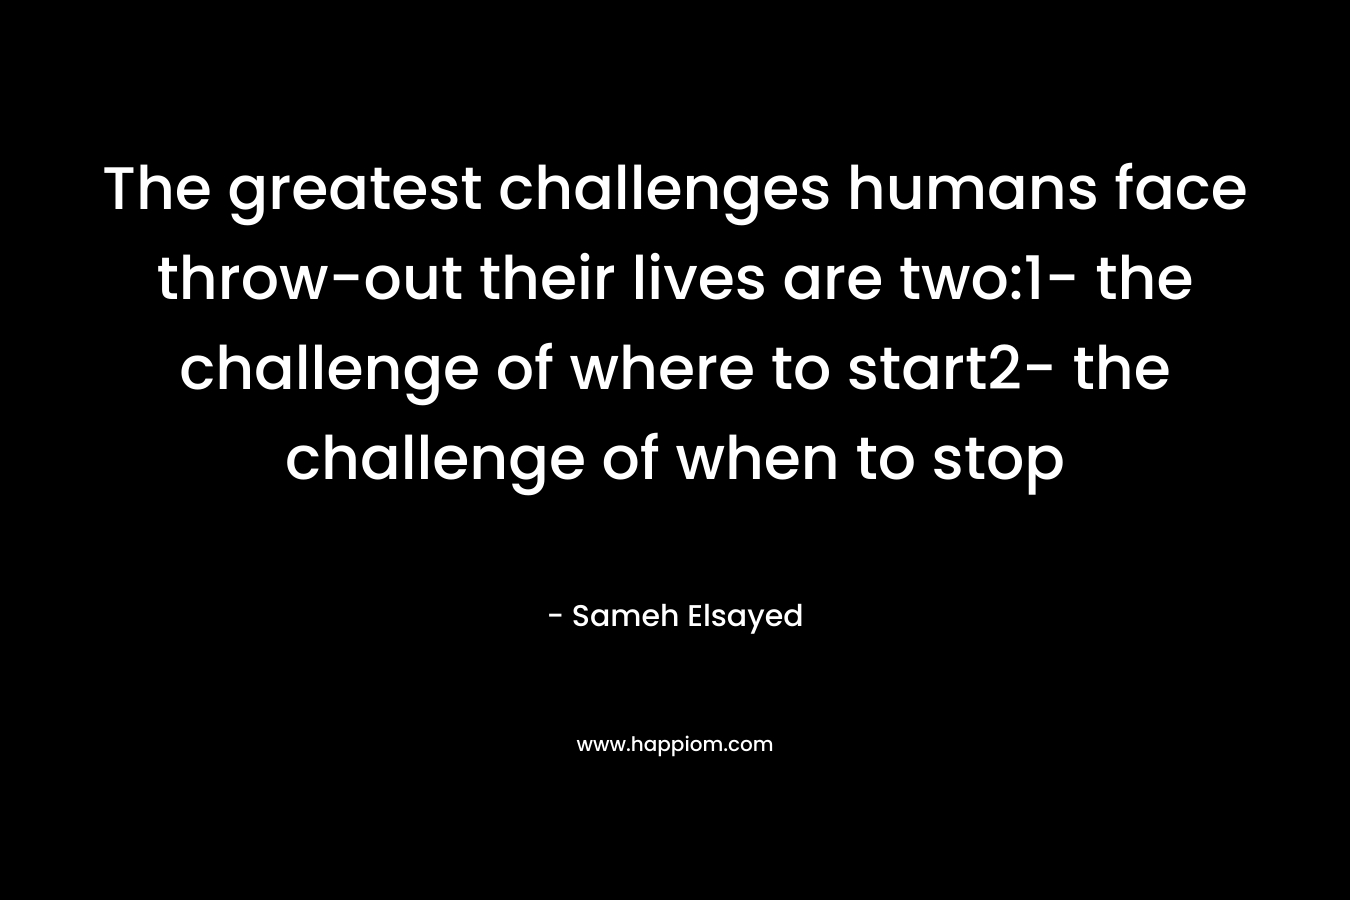 The greatest challenges humans face throw-out their lives are two:1- the challenge of where to start2- the challenge of when to stop